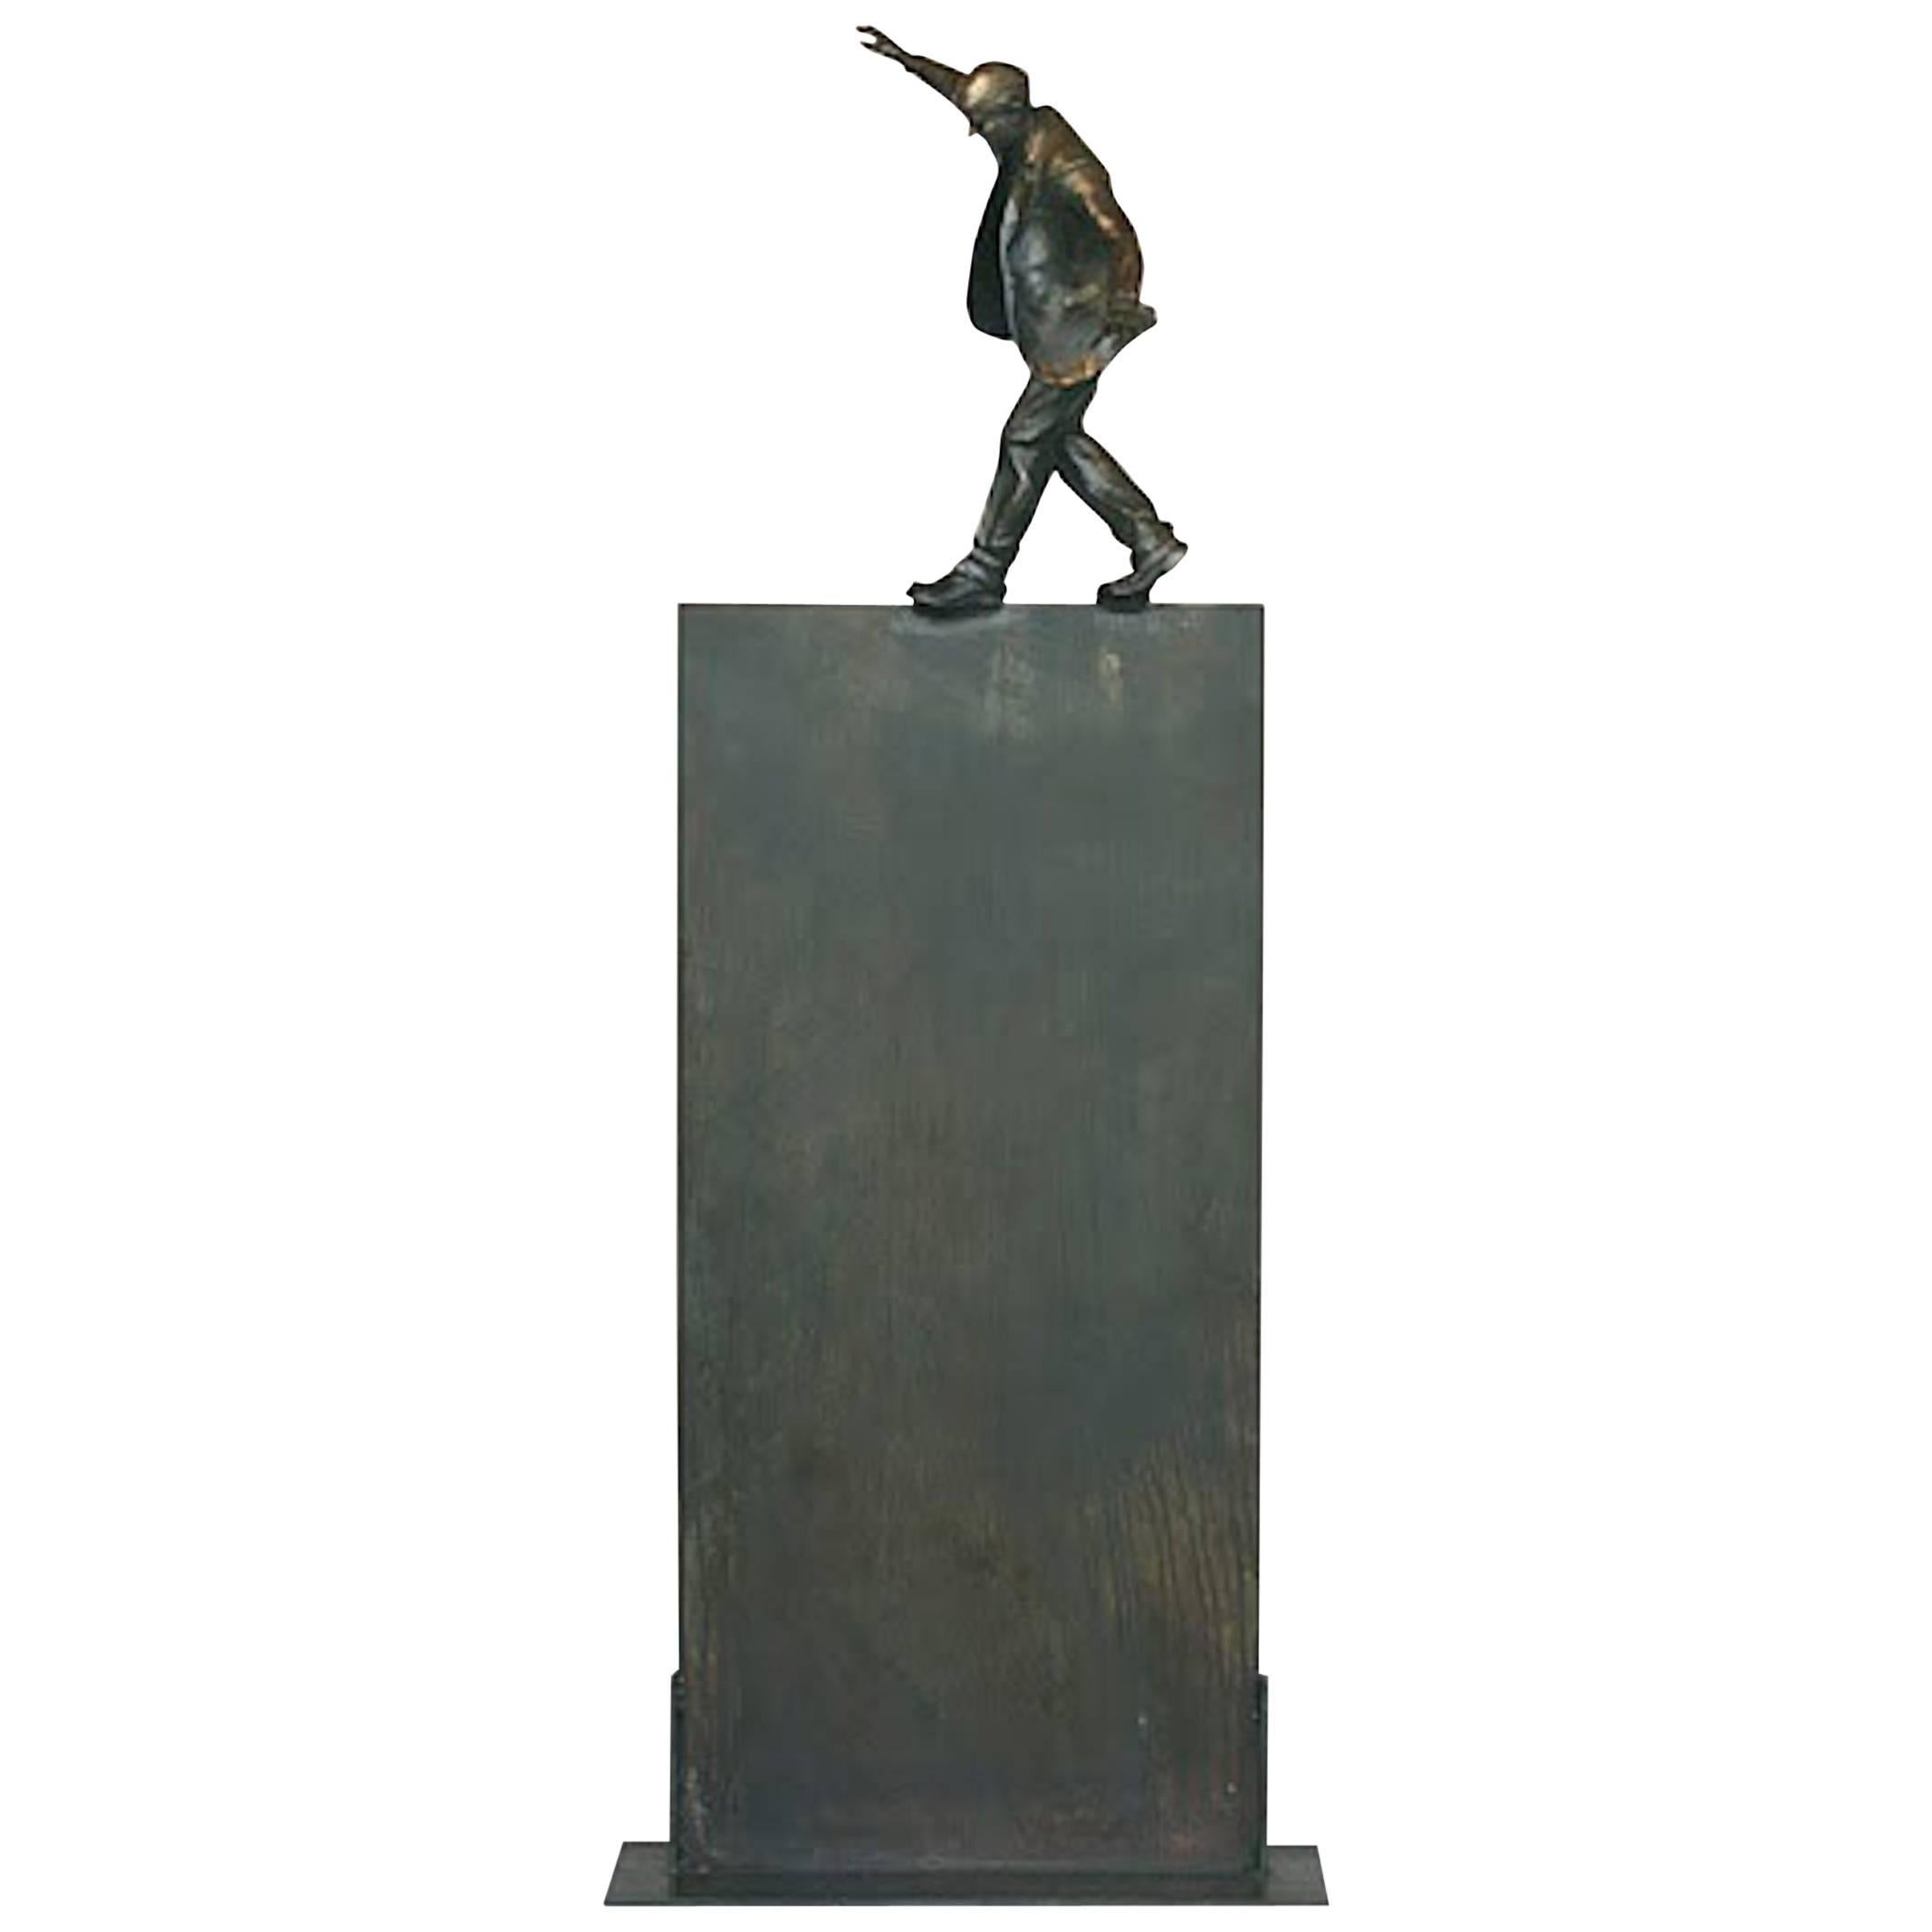 "Walking the Tightrope" Business Sculpture by Jim Rennert